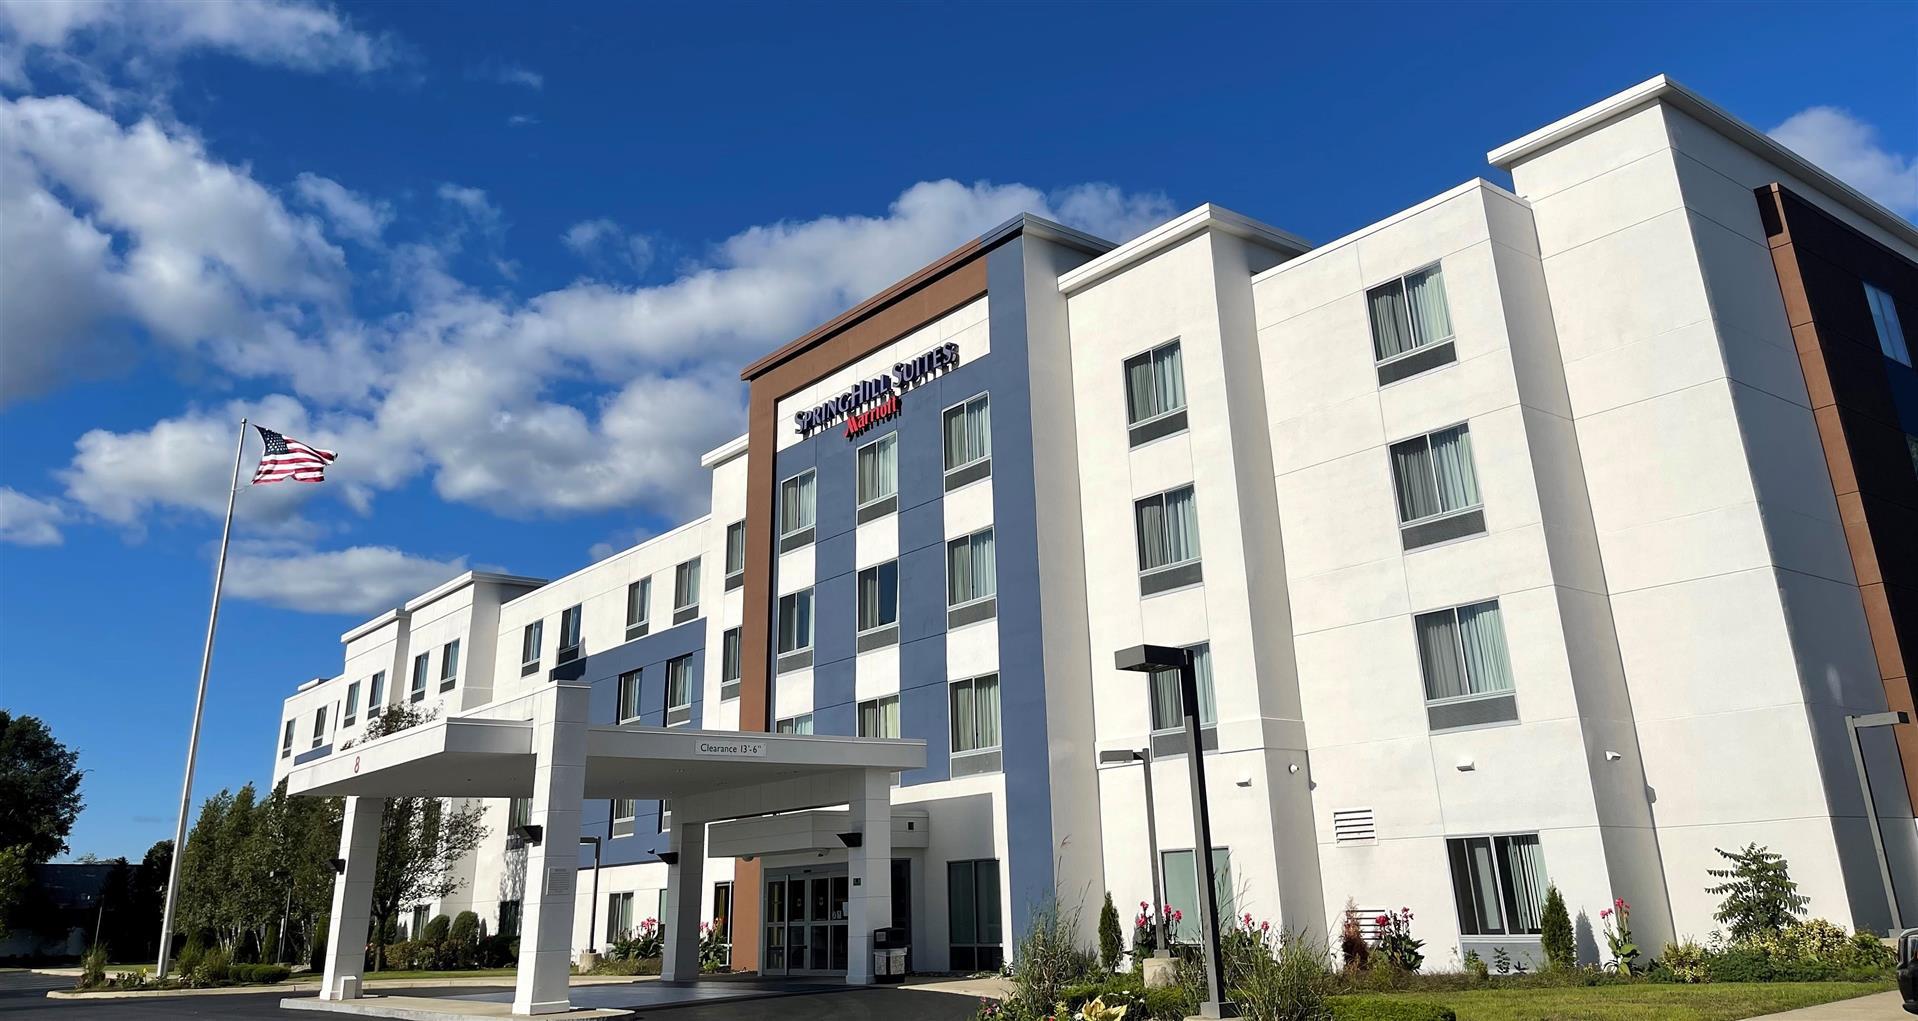 SpringHill Suites Albany-Colonie in Albany, NY